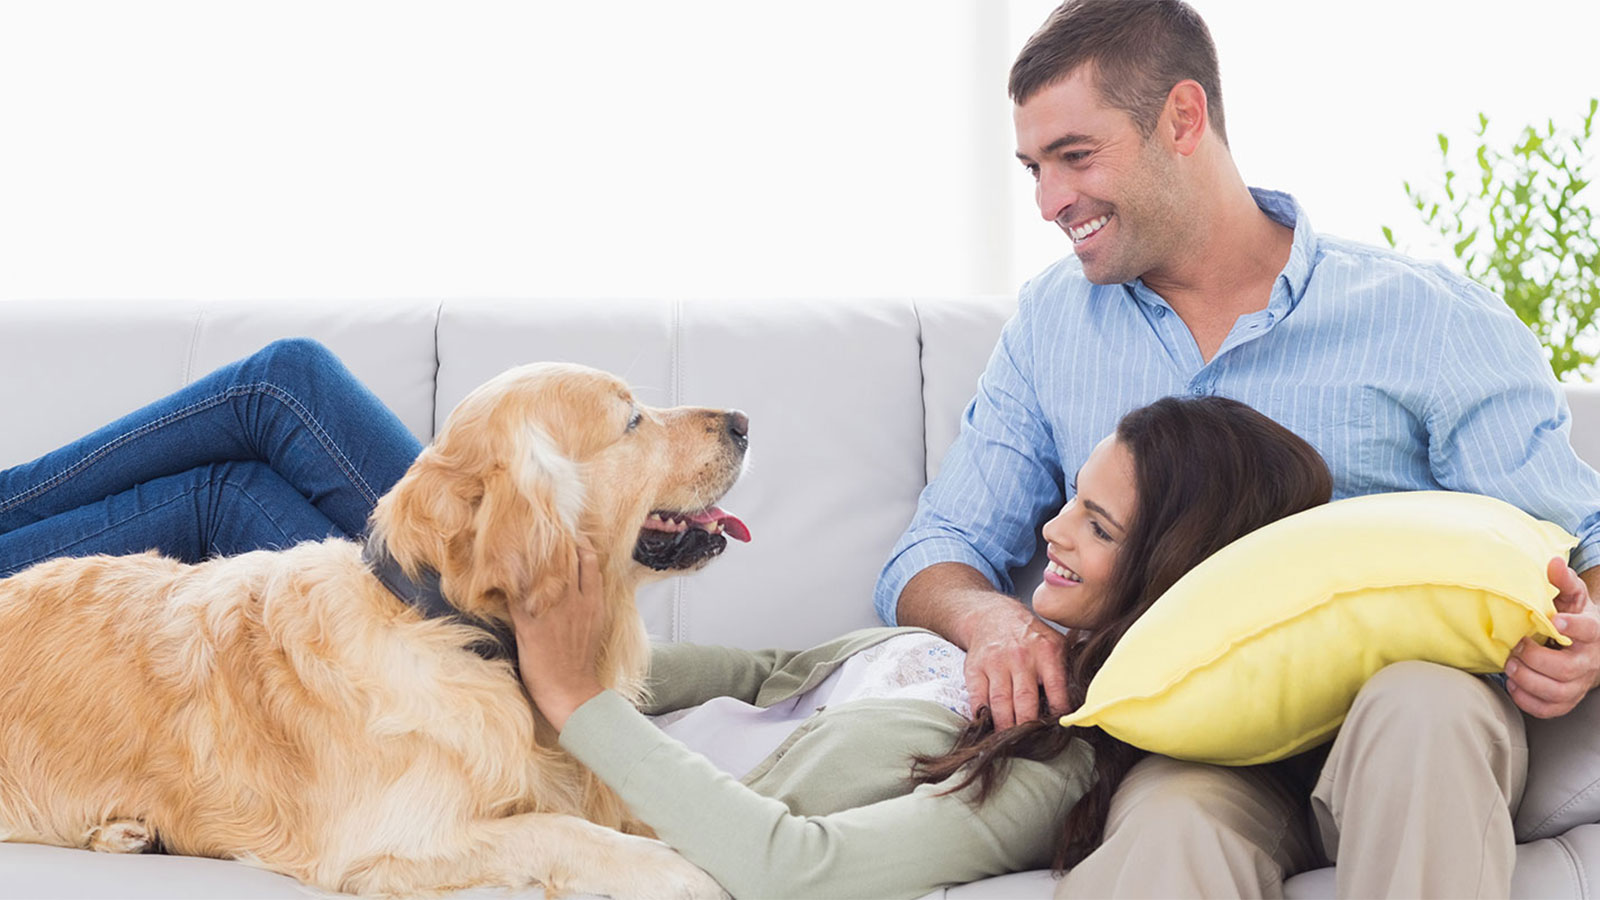 Couple lying together on a leather couch while patting their dog.